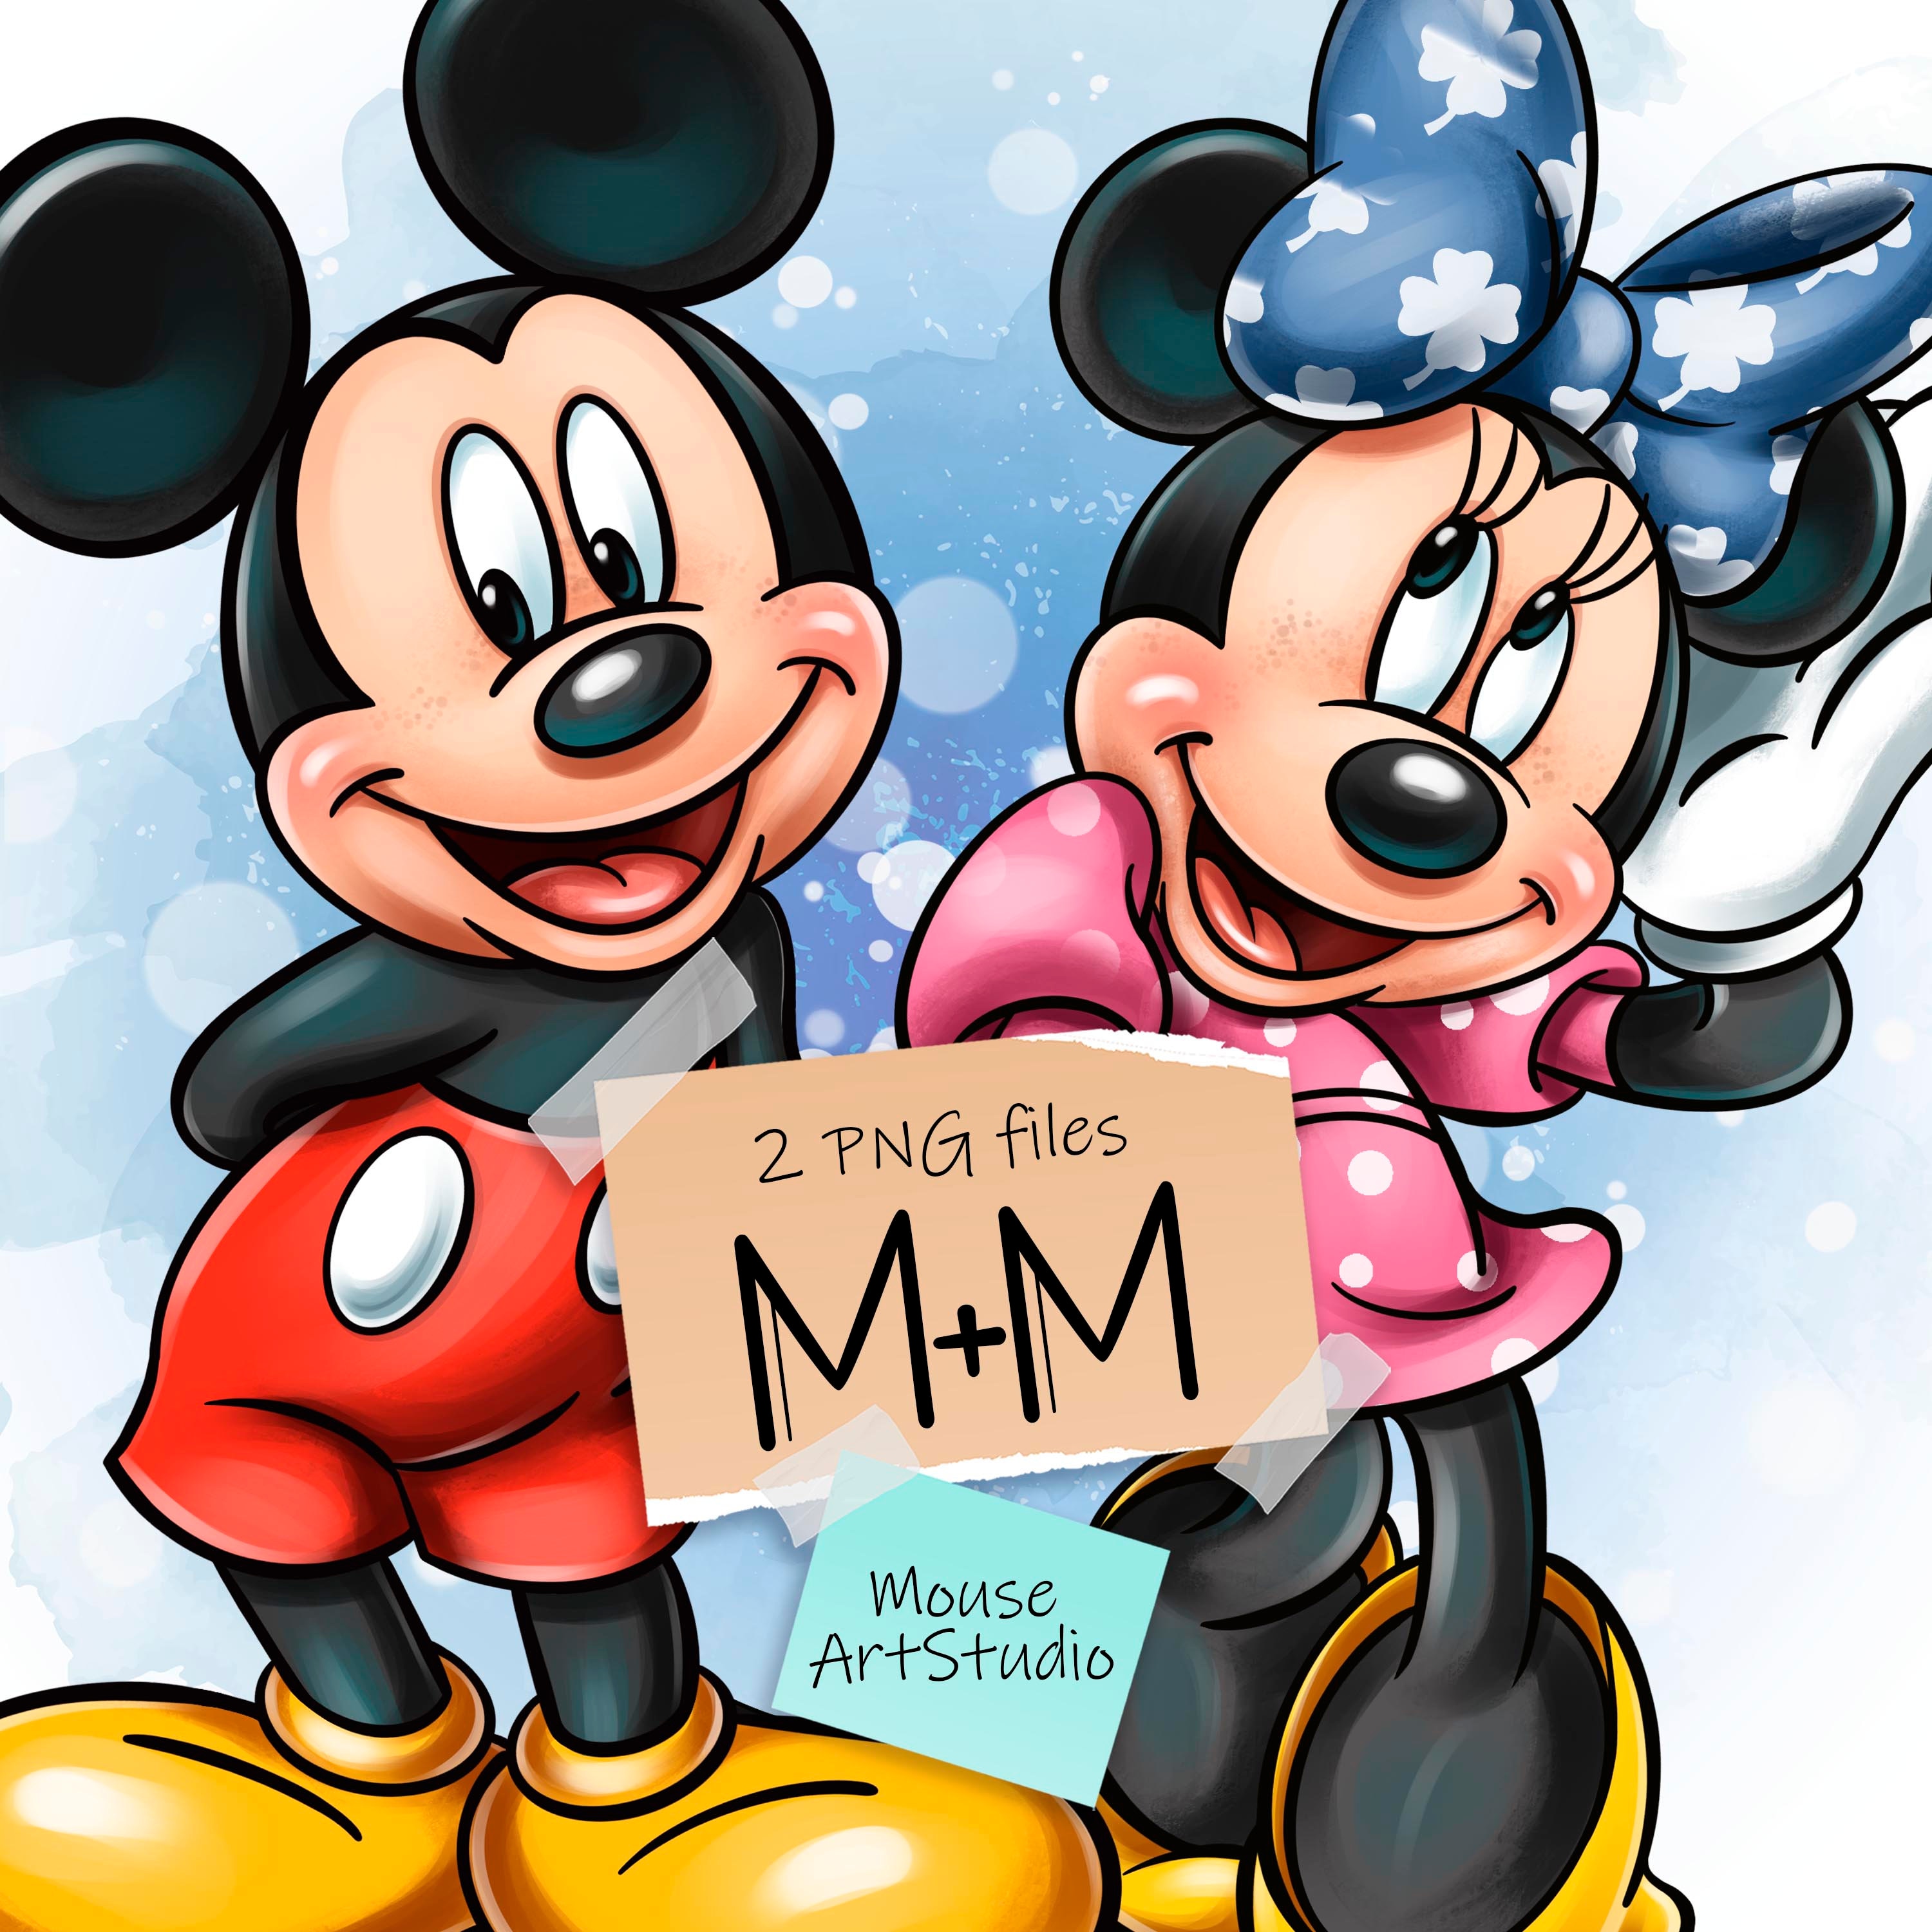 Minnie mouse  Minnie mouse cartoons, Minnie mouse pictures, Minnie mouse  images